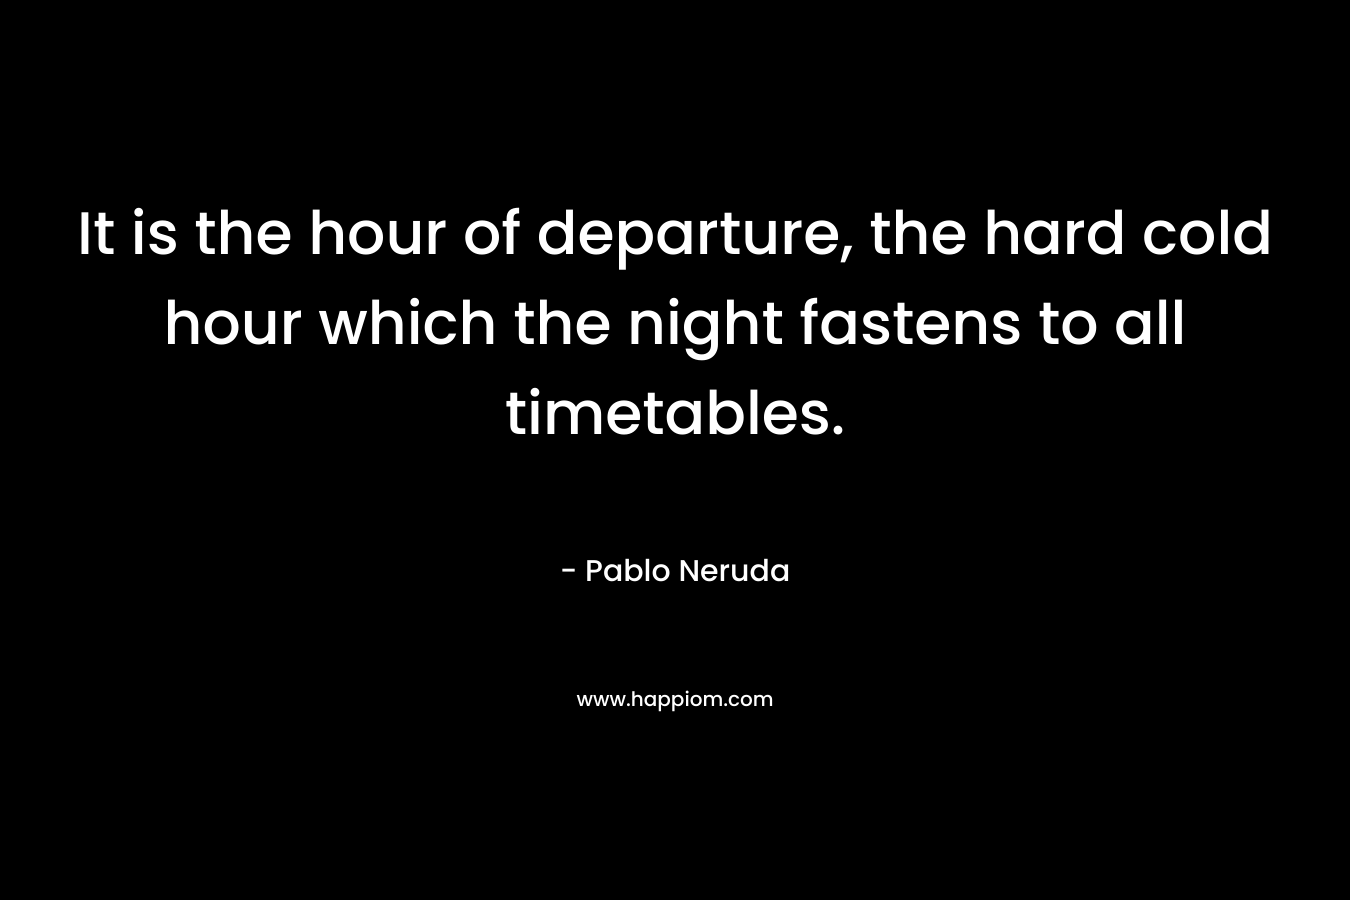 It is the hour of departure, the hard cold hour which the night fastens to all timetables. – Pablo Neruda